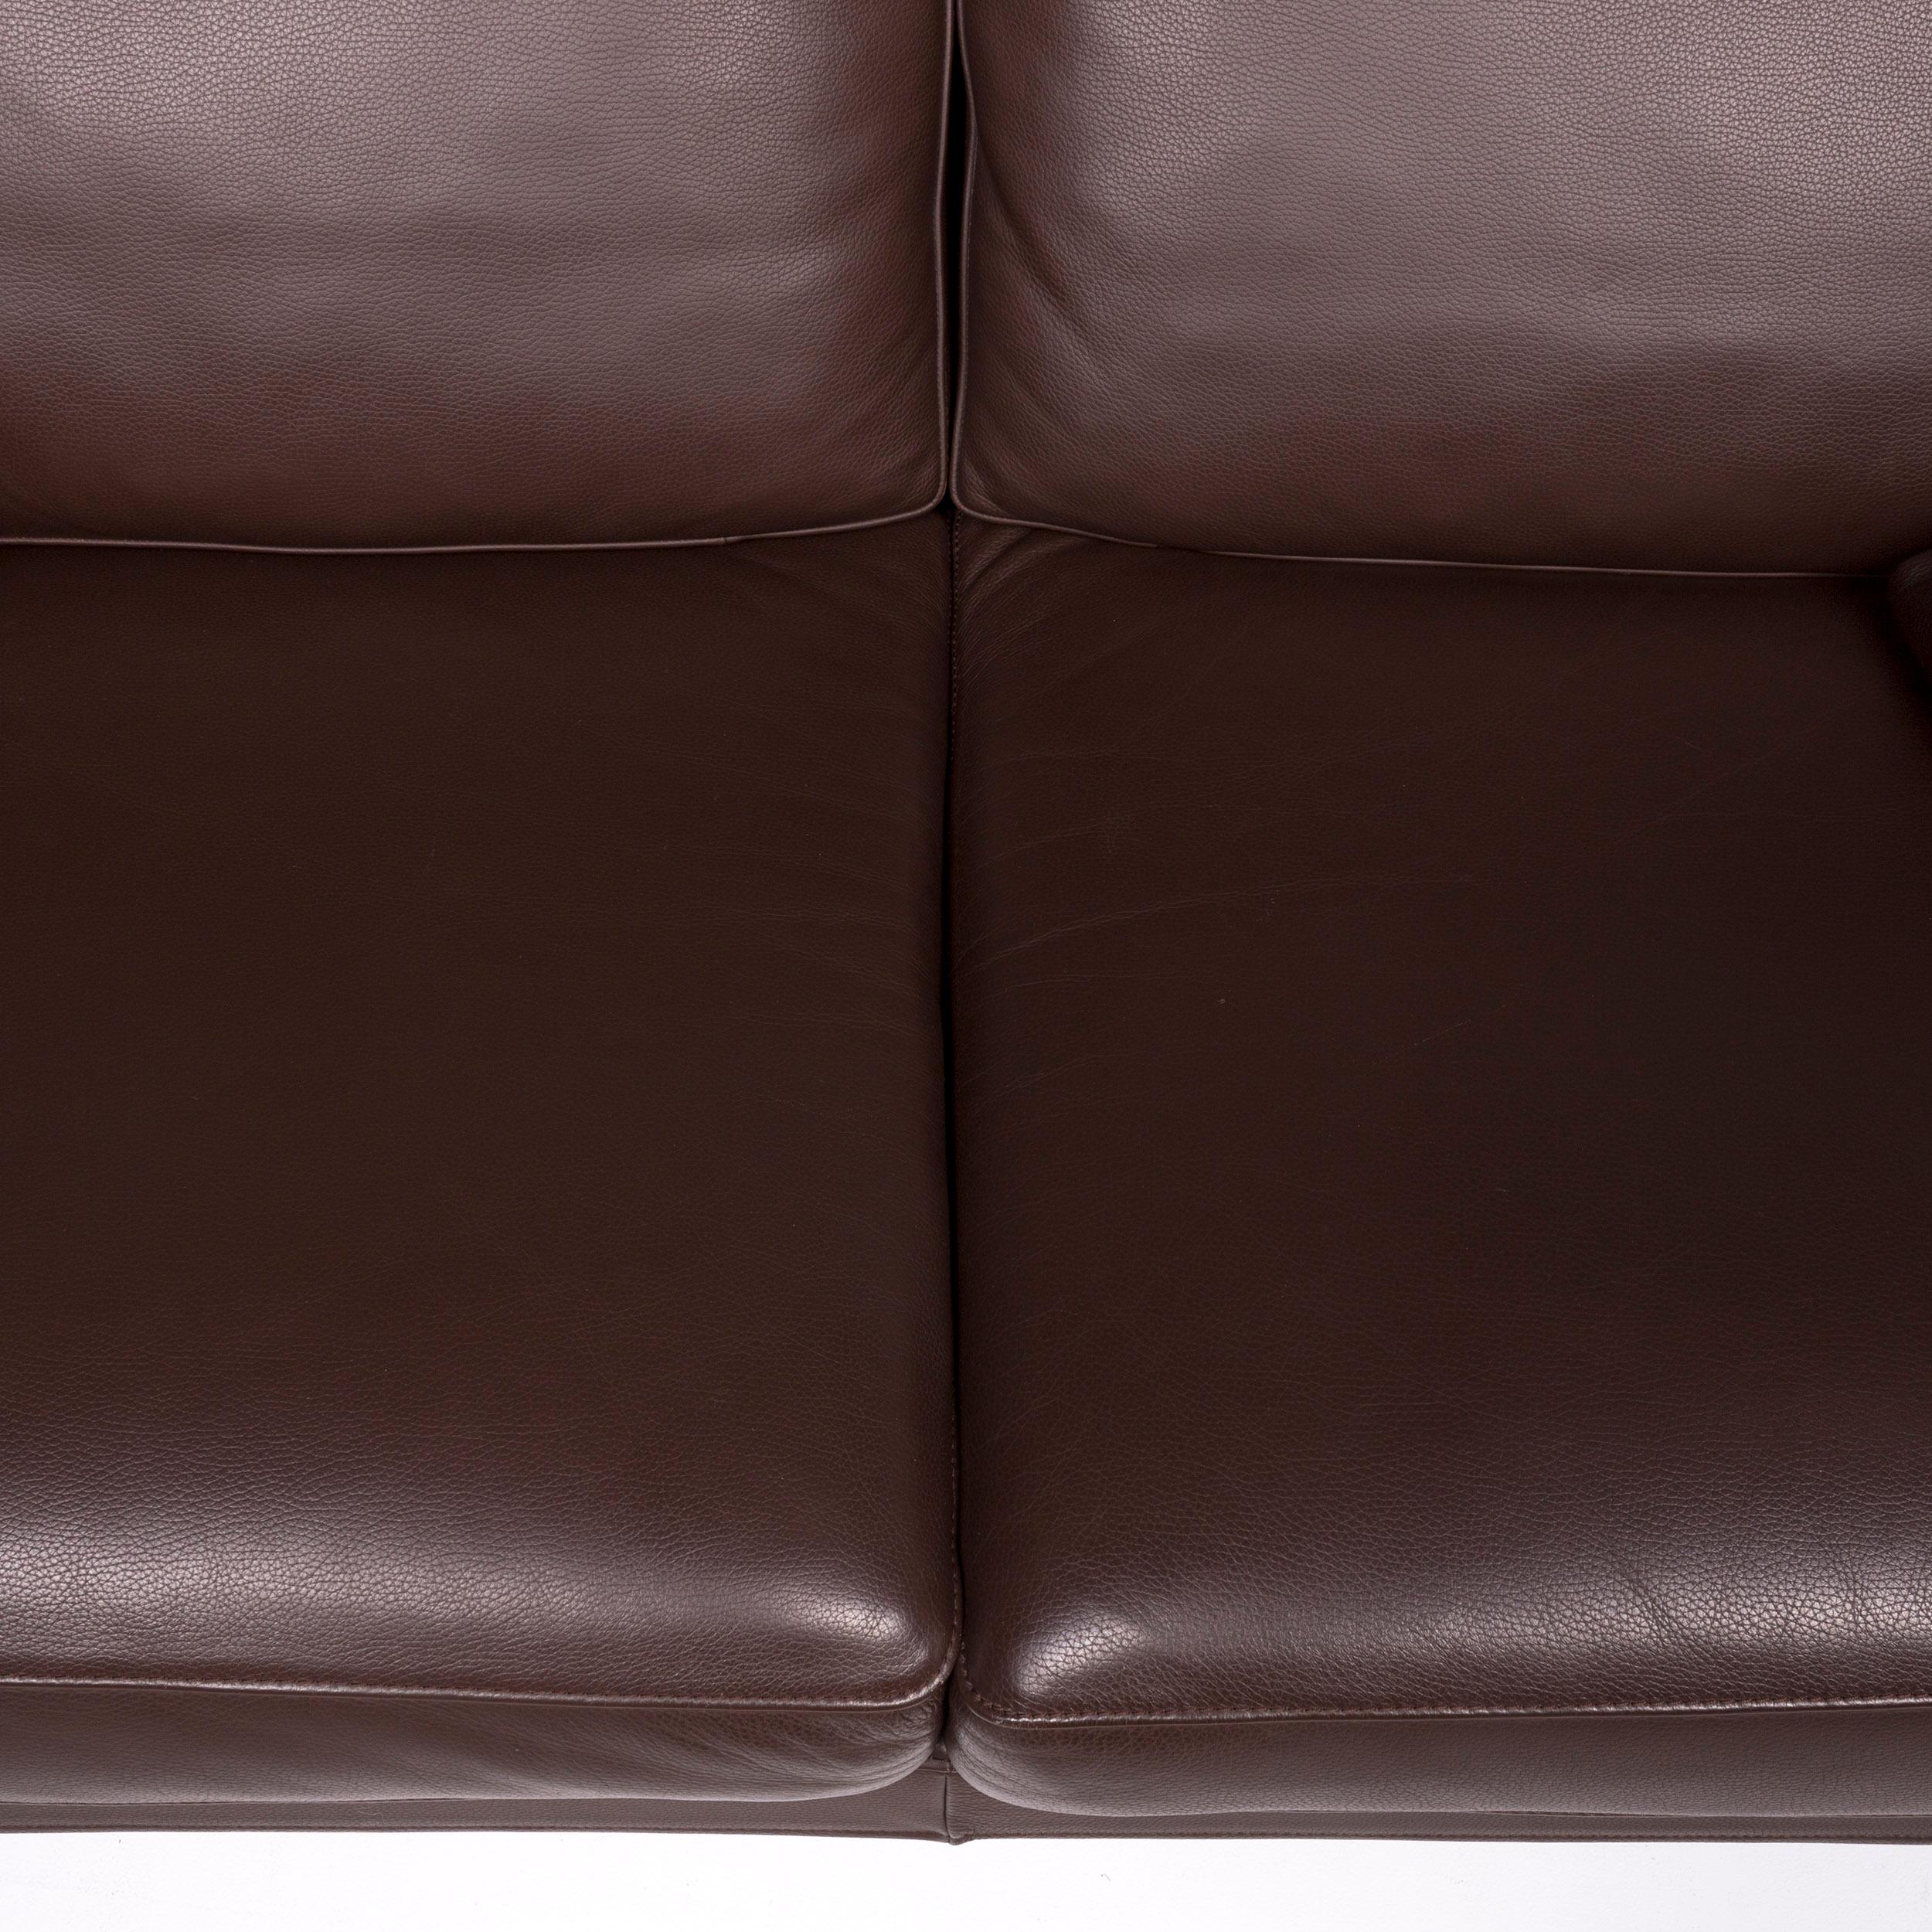 Swiss Fsm Clarus Leather Sofa Brown Dark Brown Two-Seater Function Couch